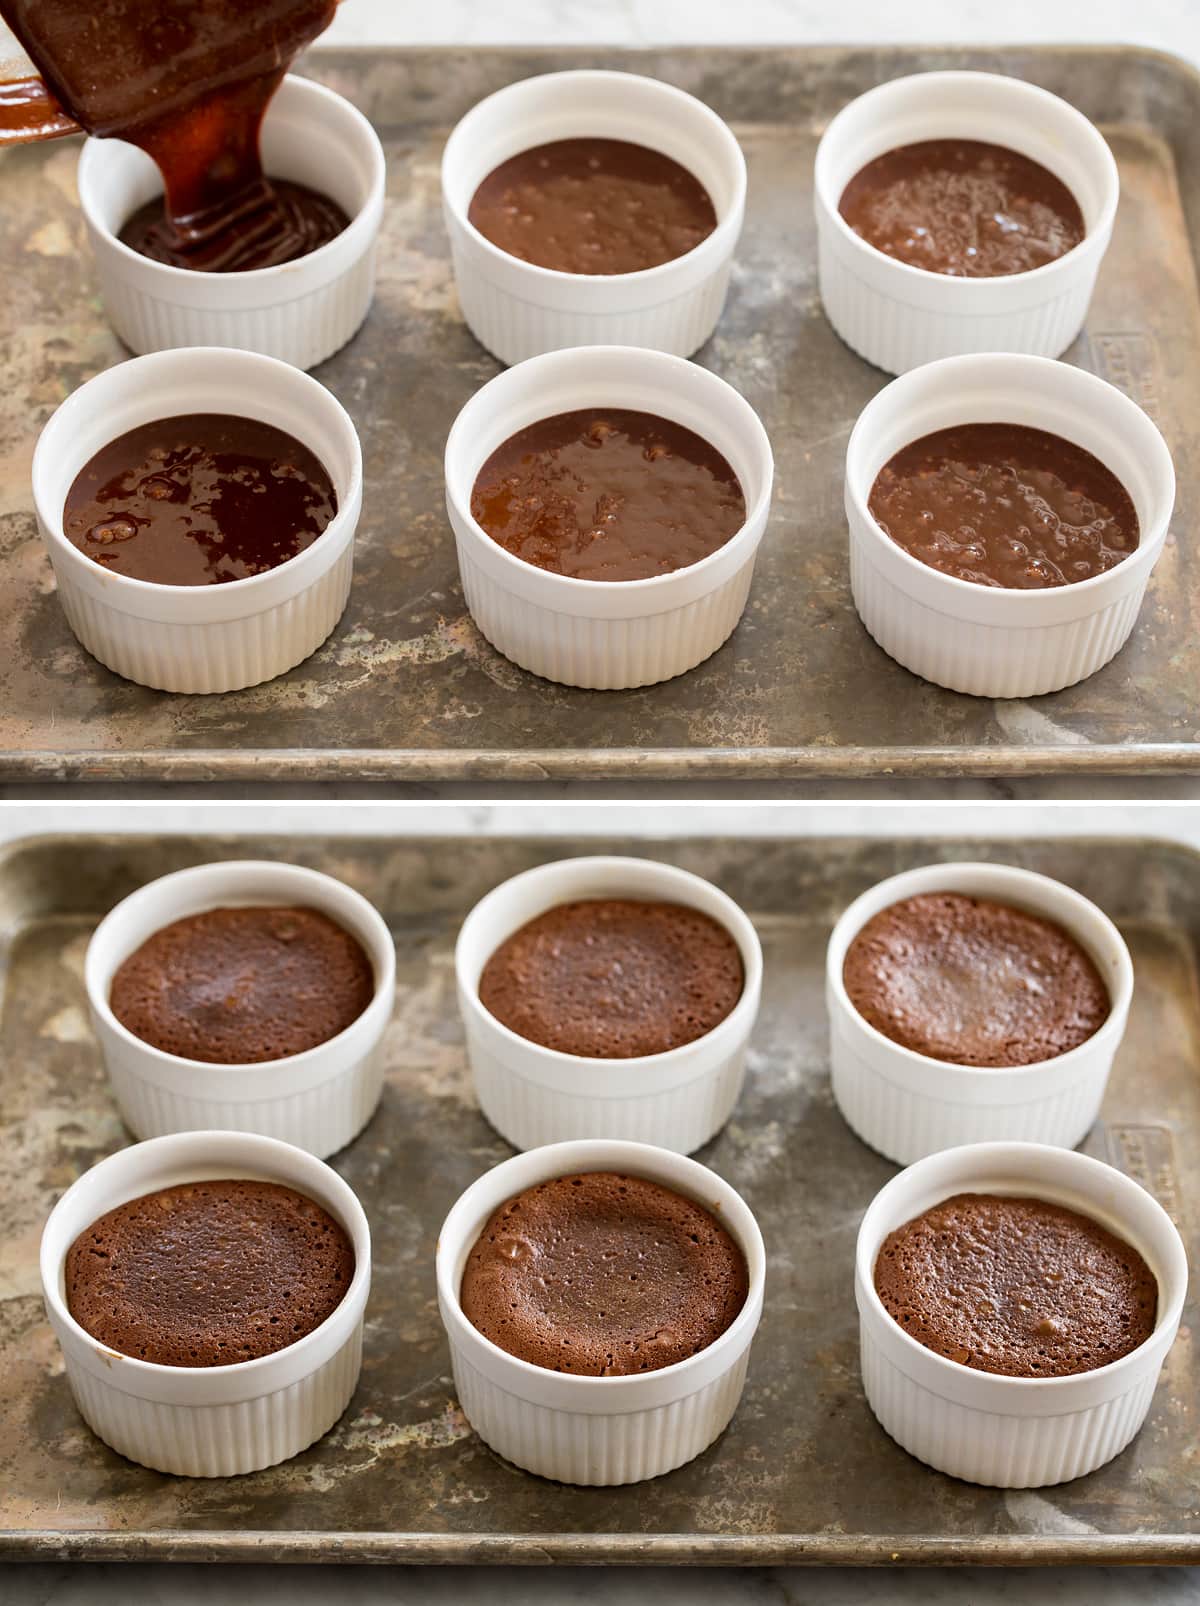 Molten lava cake batter being poured in custard cups then also shown after baking.